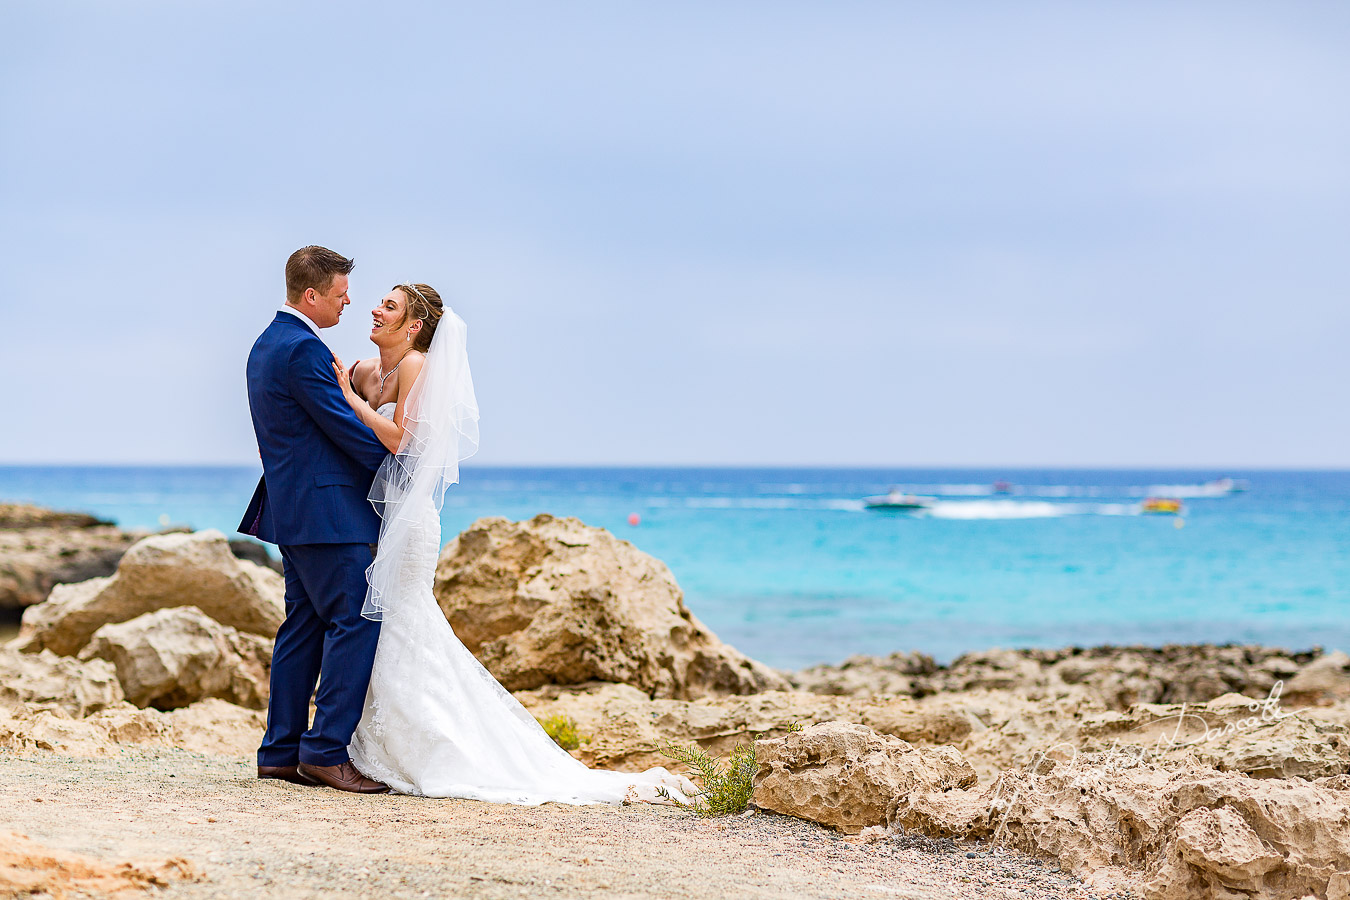 Alicia and Matthew photographed at Nissi Beach Resort in Ayia Napa, Cyprus by Cristian Dascalu.